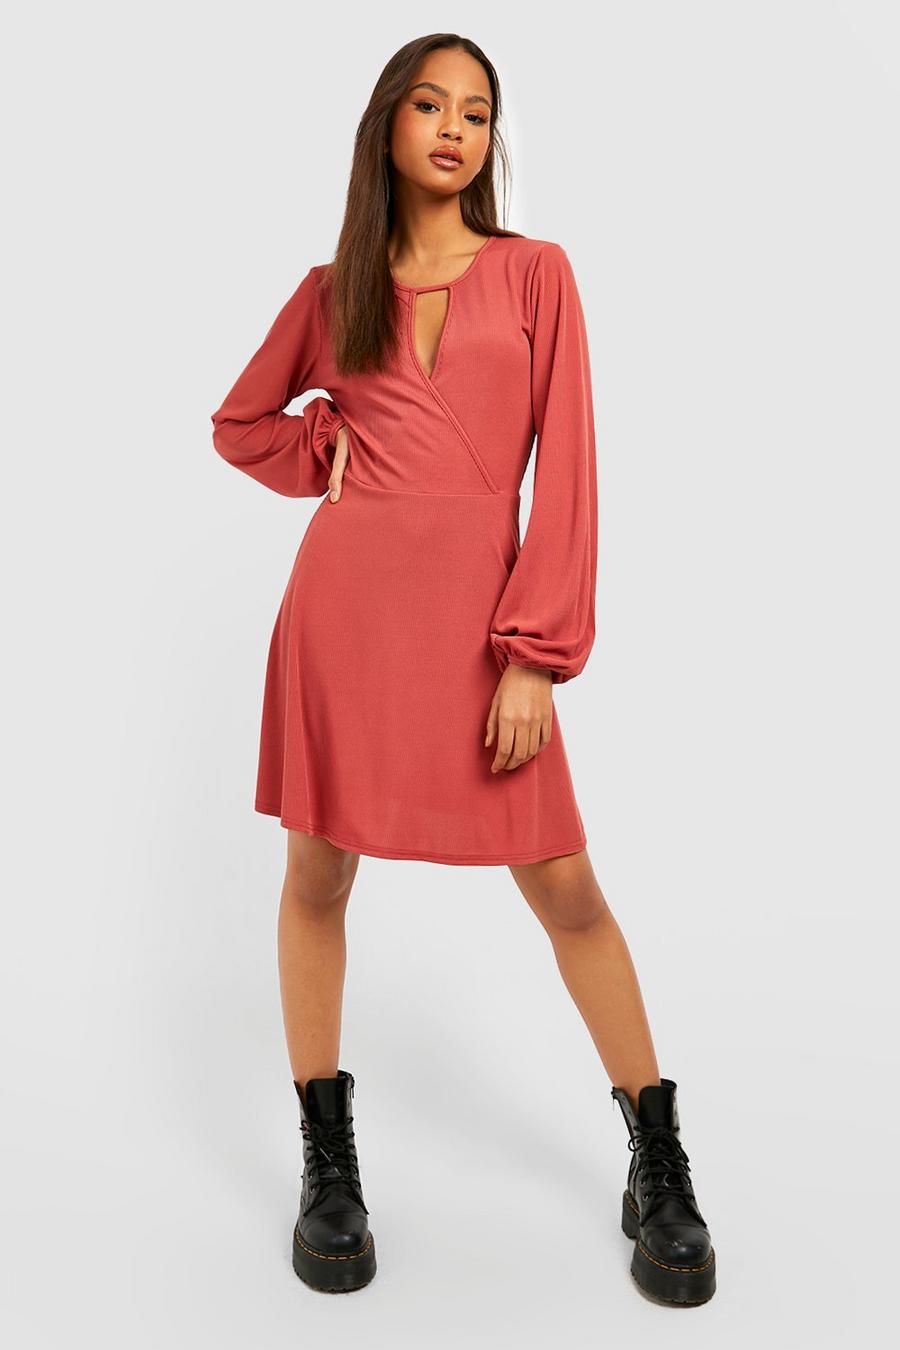 Dusty rose rosa Cut Out Skater Dress